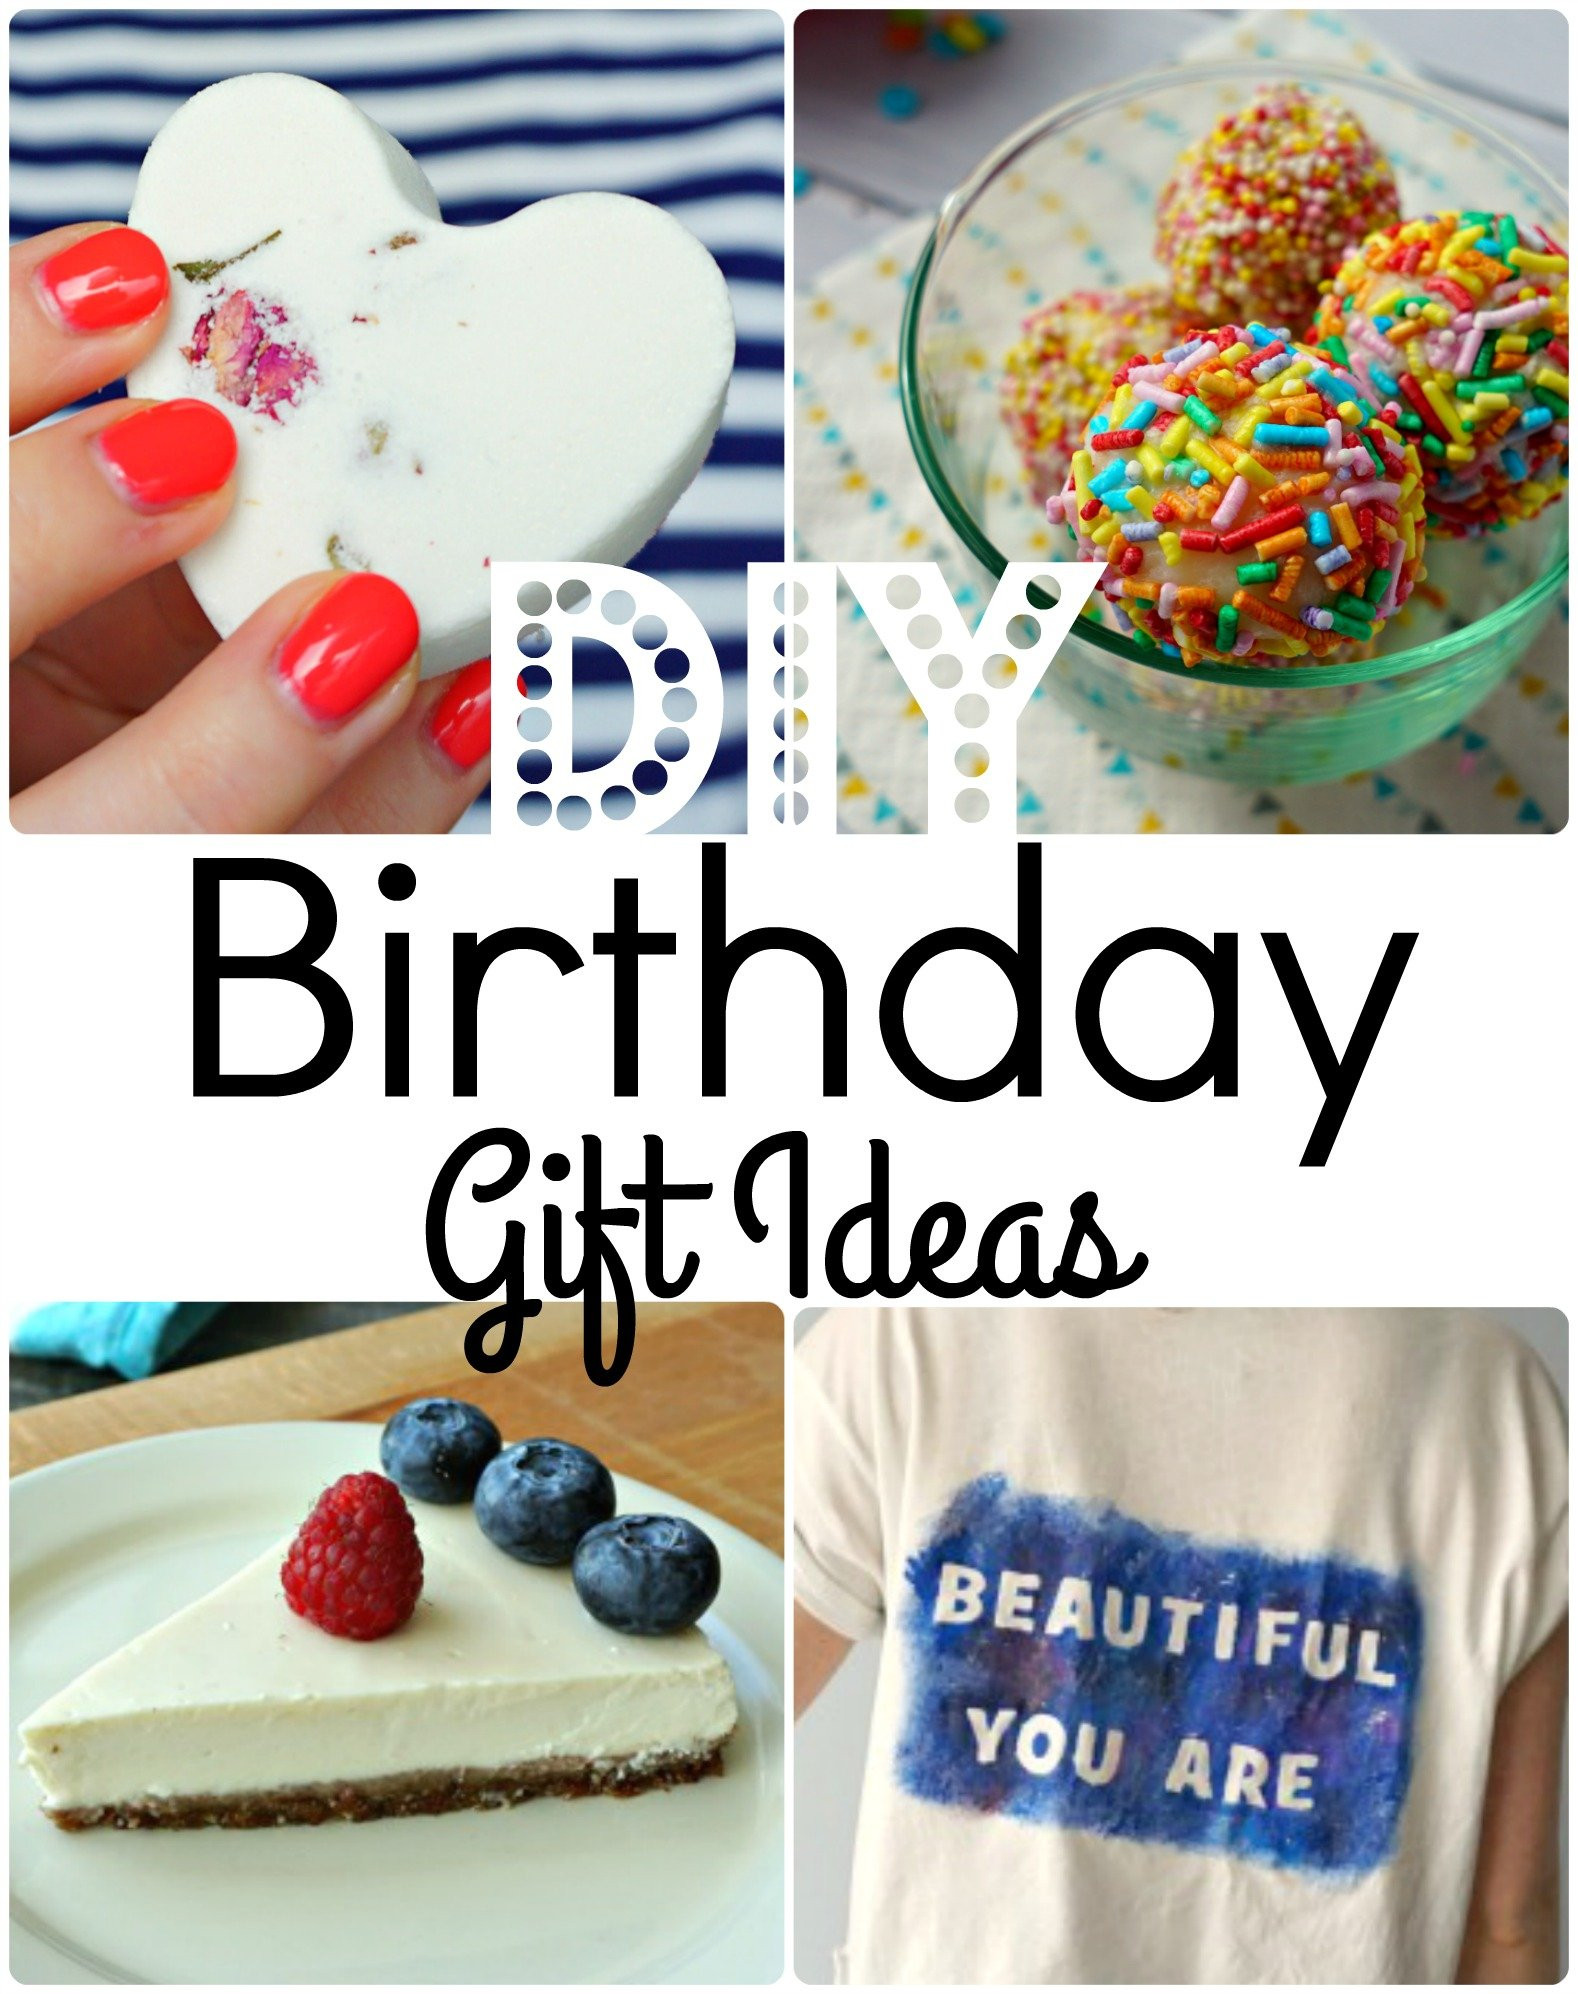 Birthday Diy Gifts
 7 Easy DIY Birthday Gift Ideas that are always a hit The